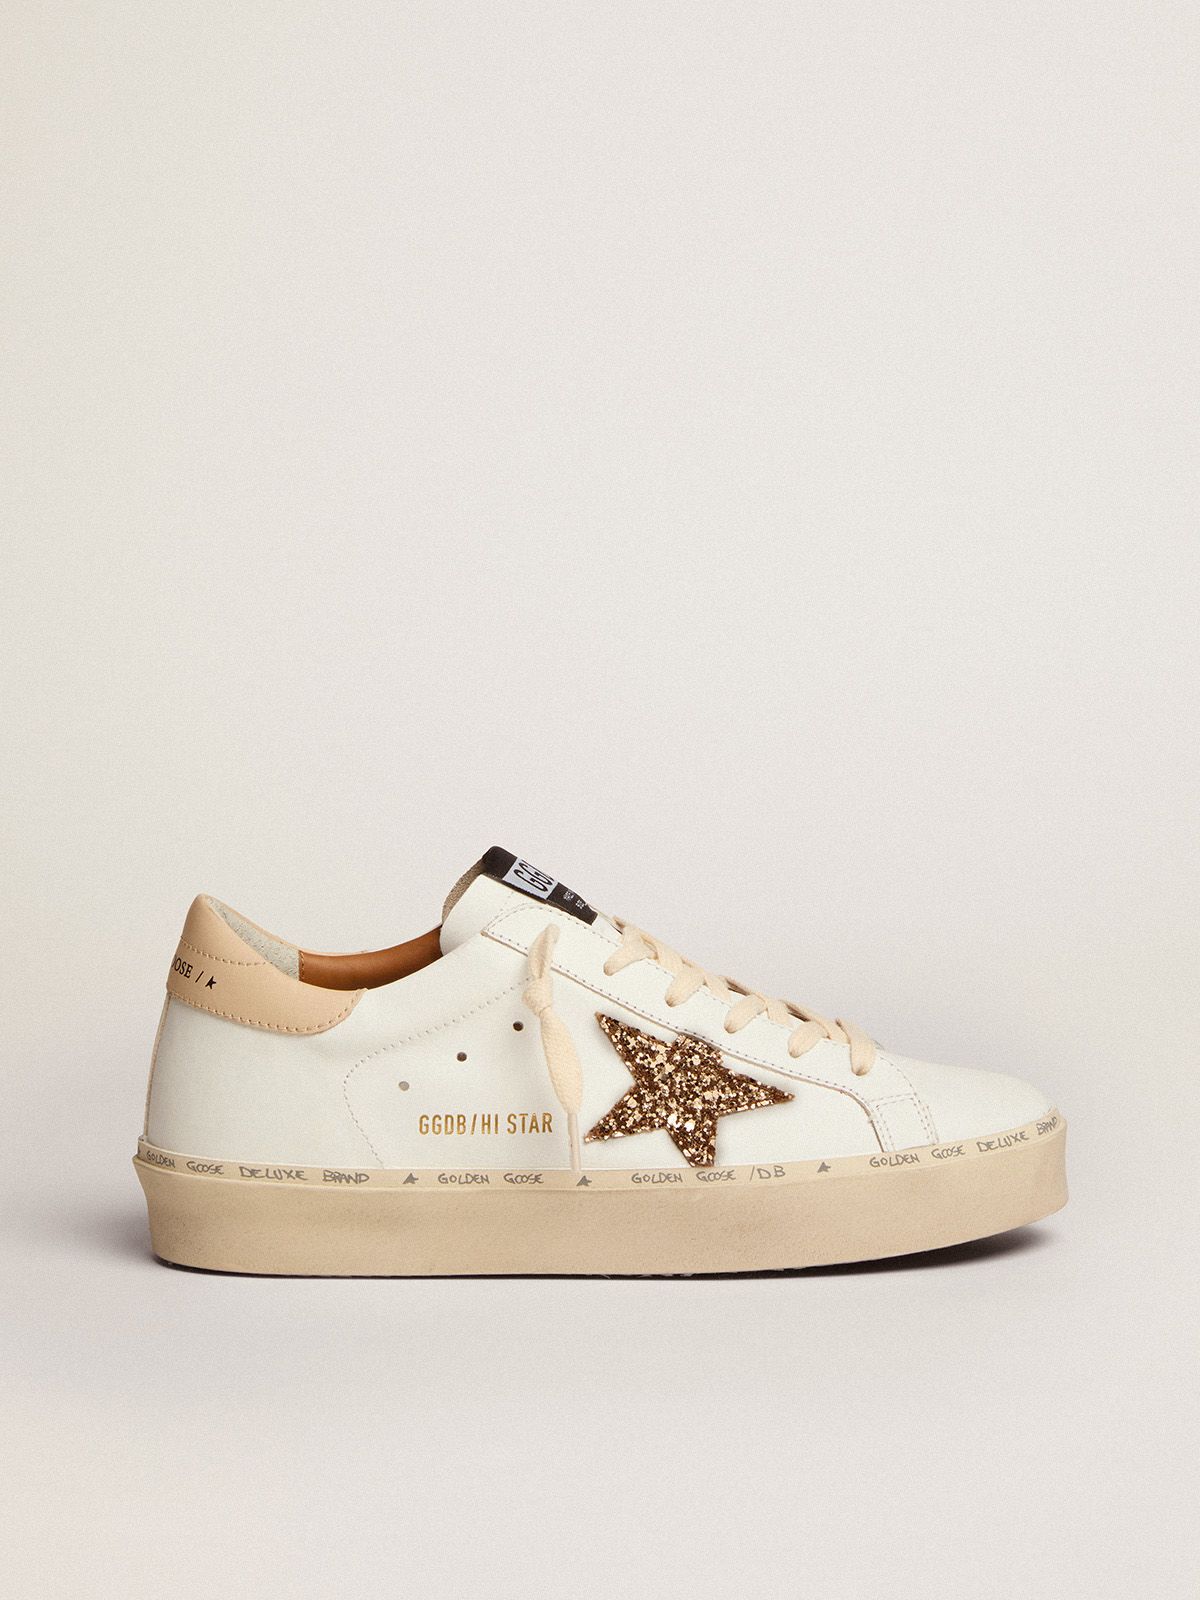 golden goose glitter sneakers leather and tab beige heel star Star gold with Hi